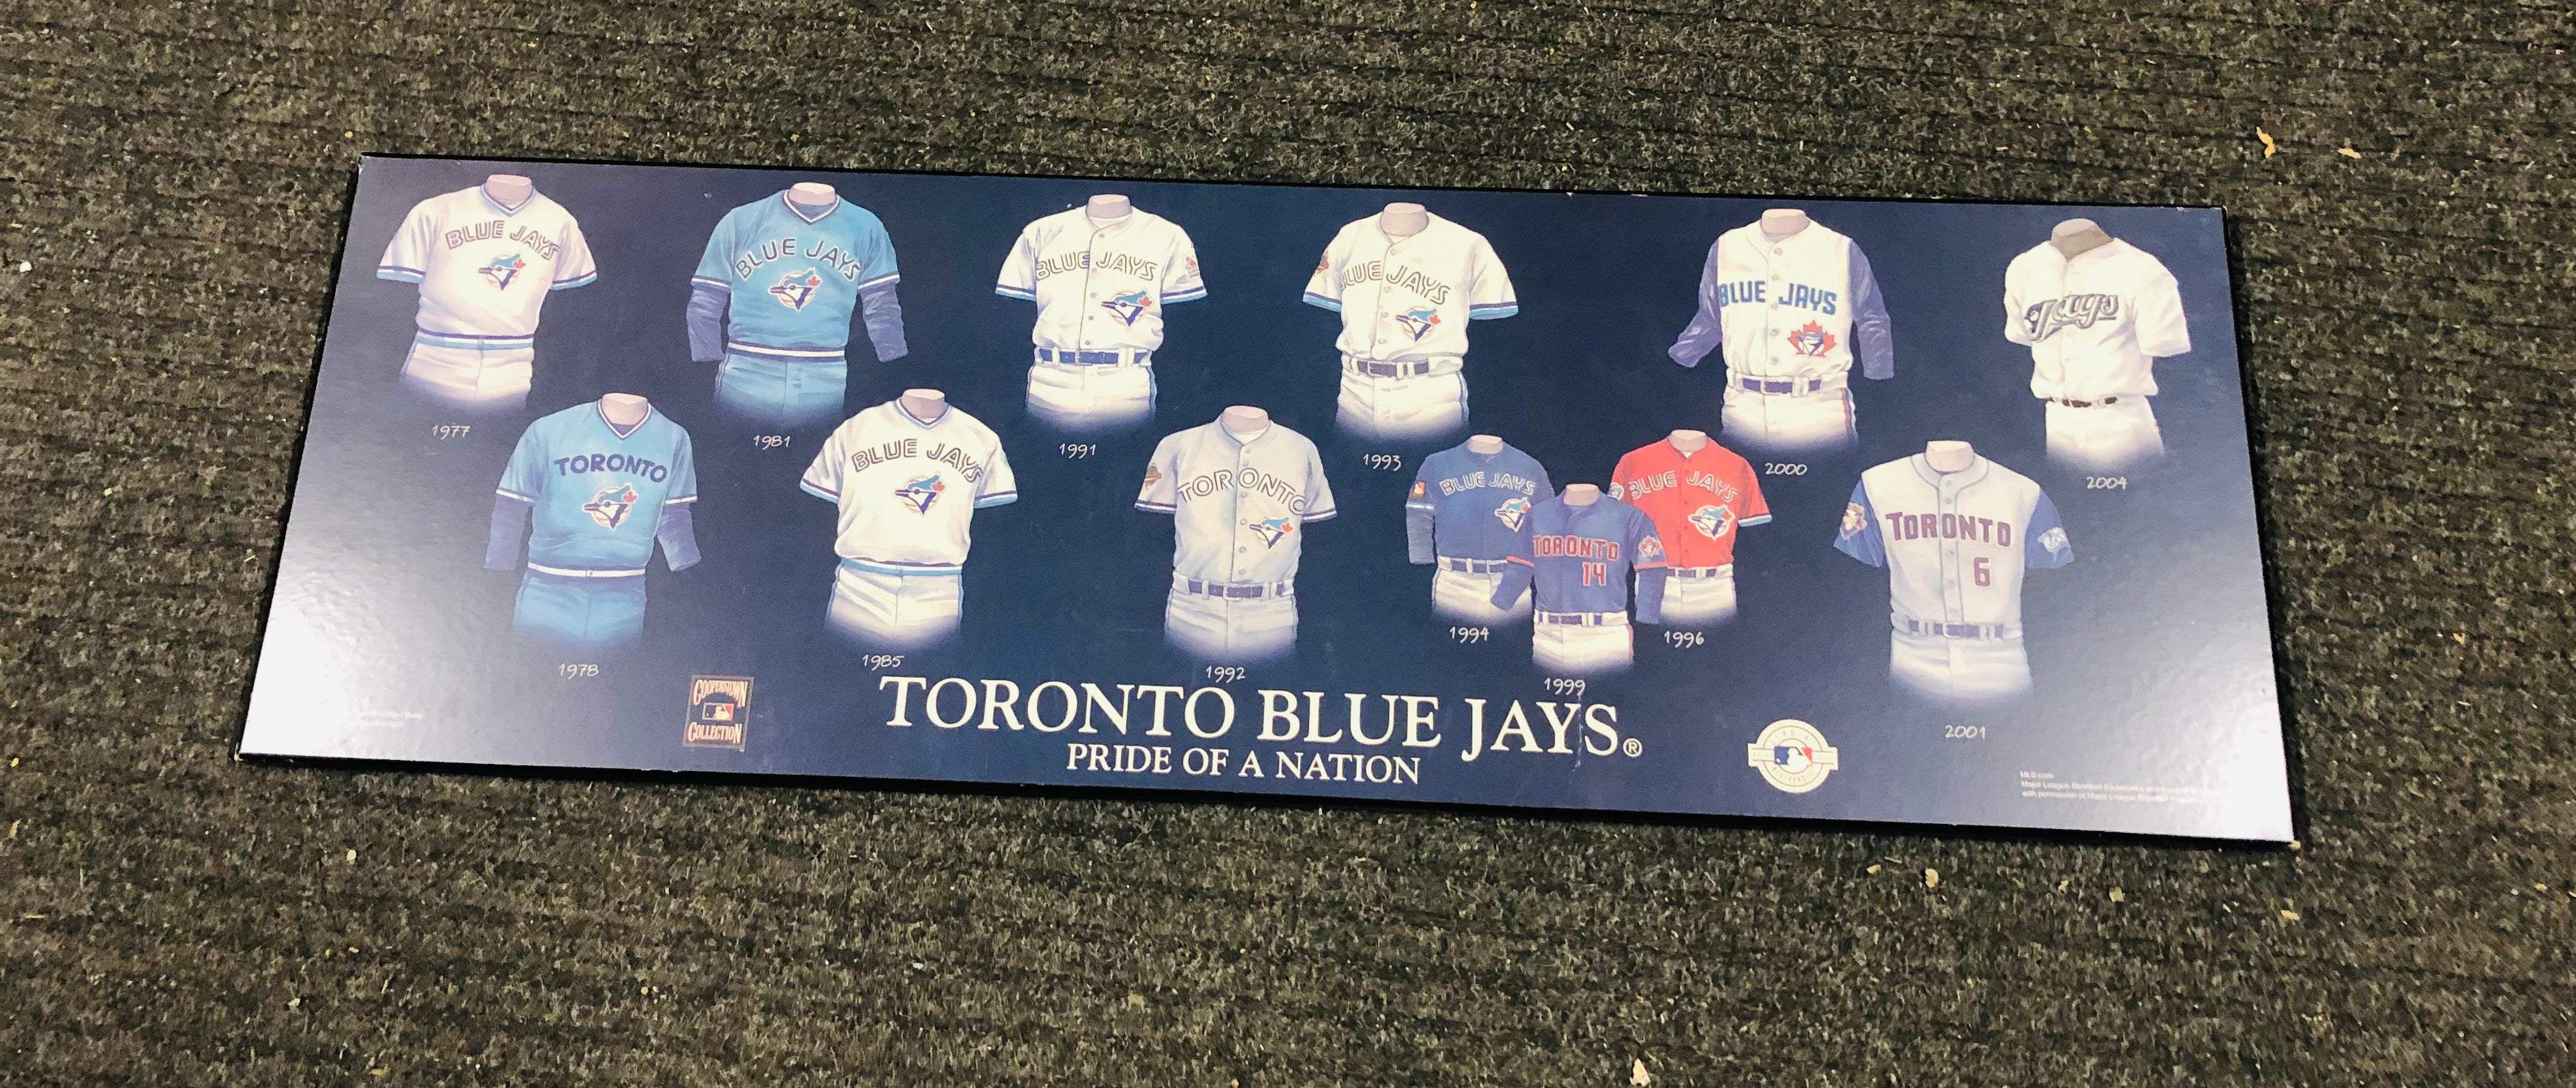 Toronto Blue Jays Pride of the Nation poster on particle board